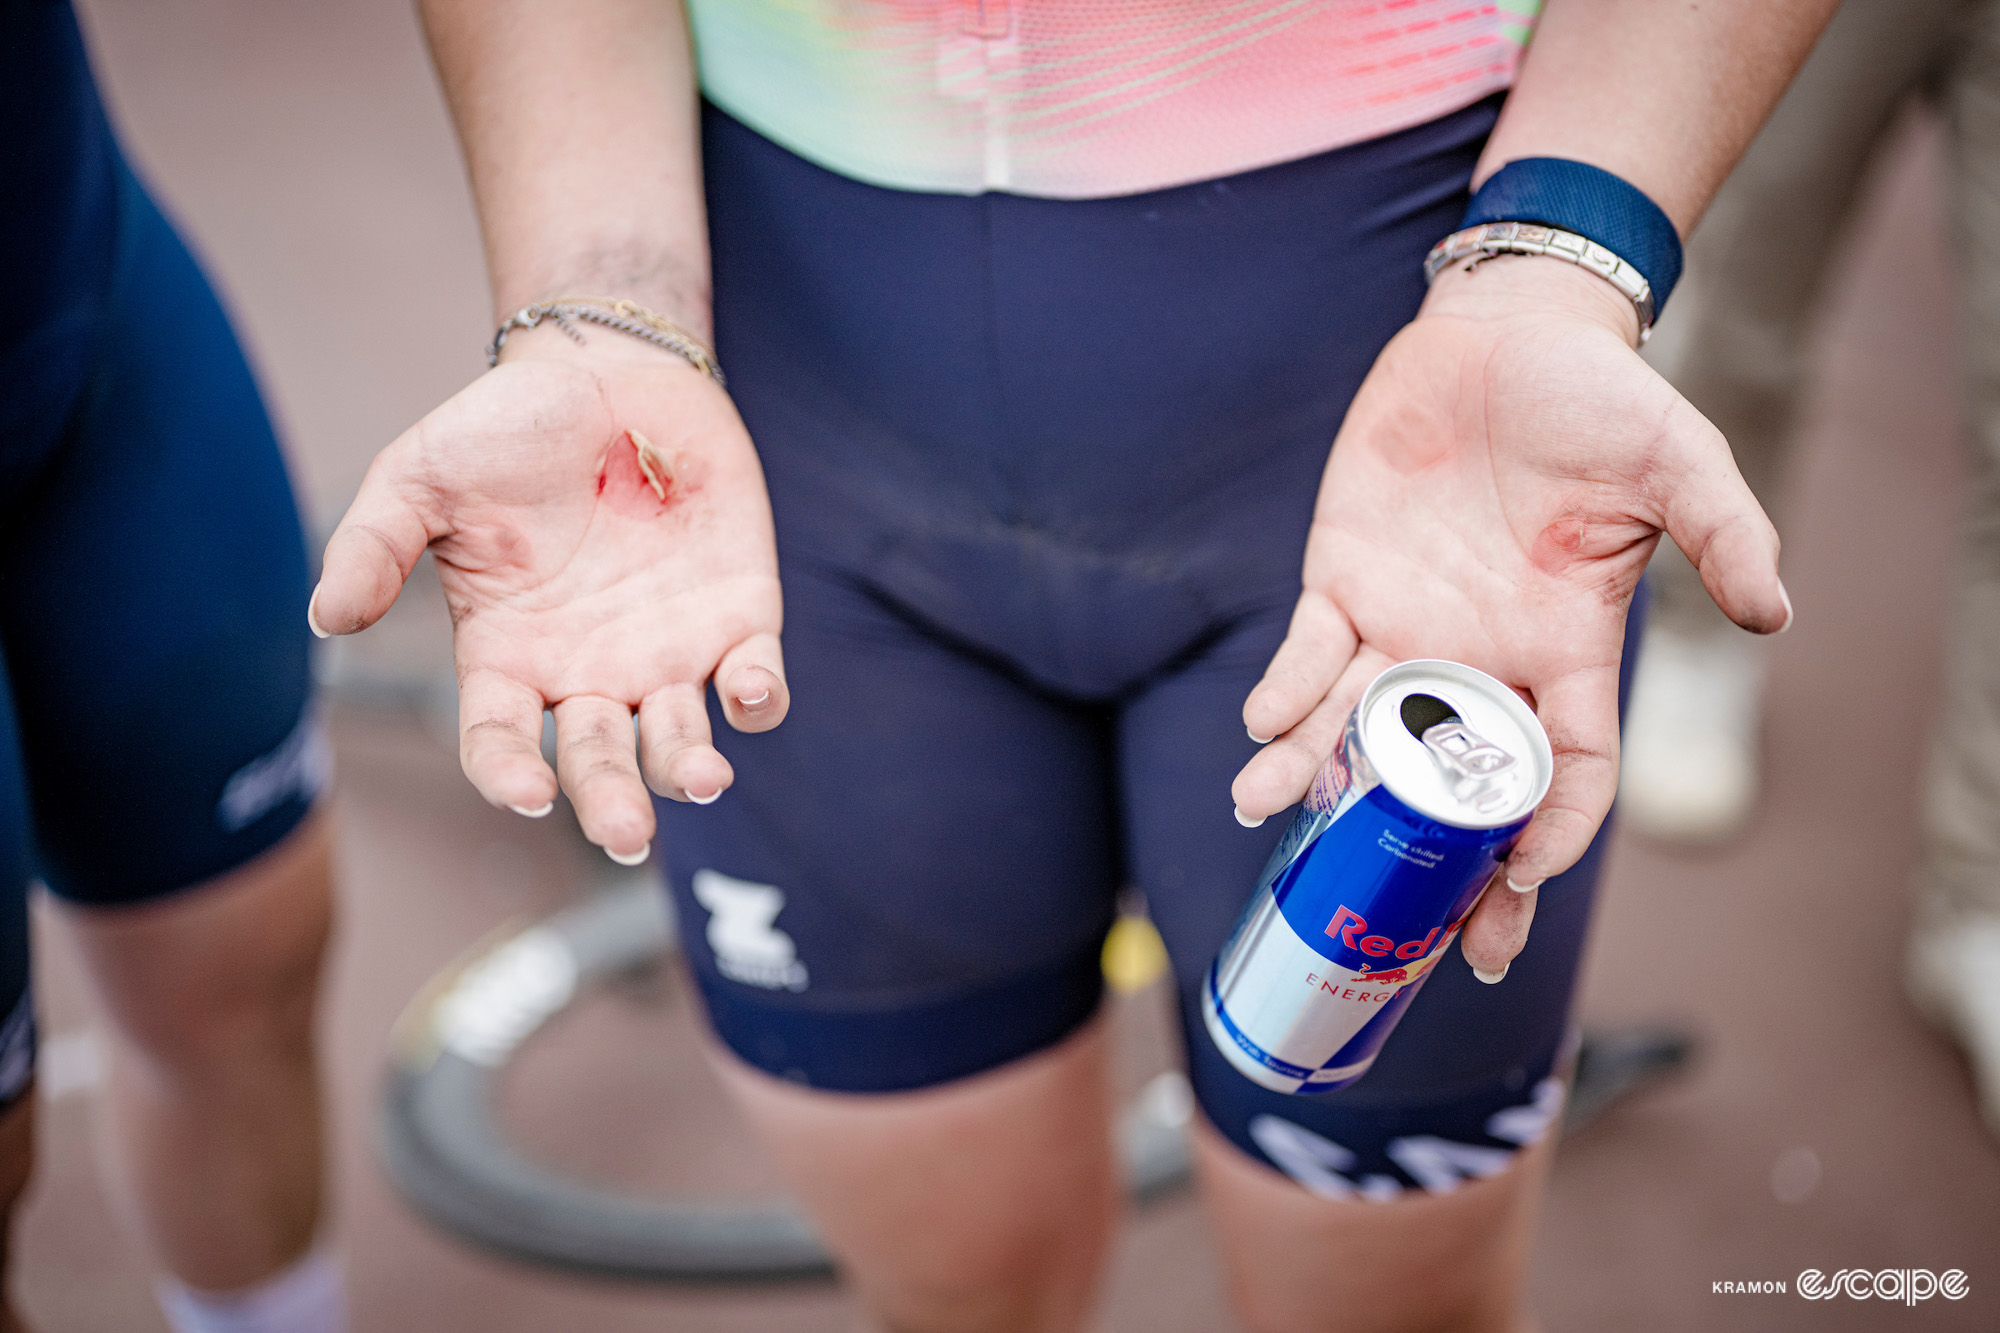 Zoe Backstedt balances a can of Red Bull in one hand as she displays several large, cracked and open blisters on her hands.